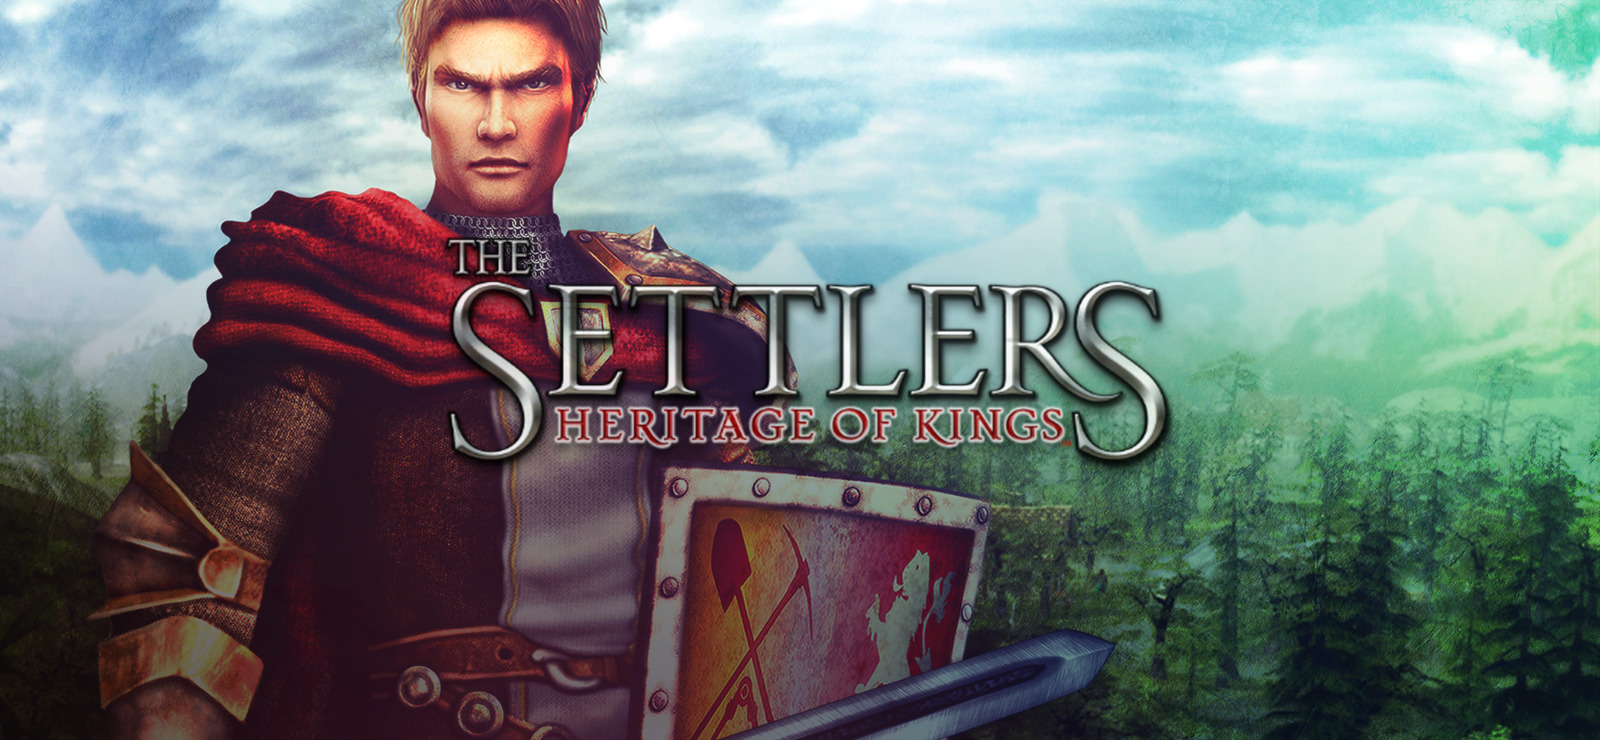 Games The Settlers Cracked / The Settlers Codex Skidrow Codex Games / Heroes of myths 25 643x.